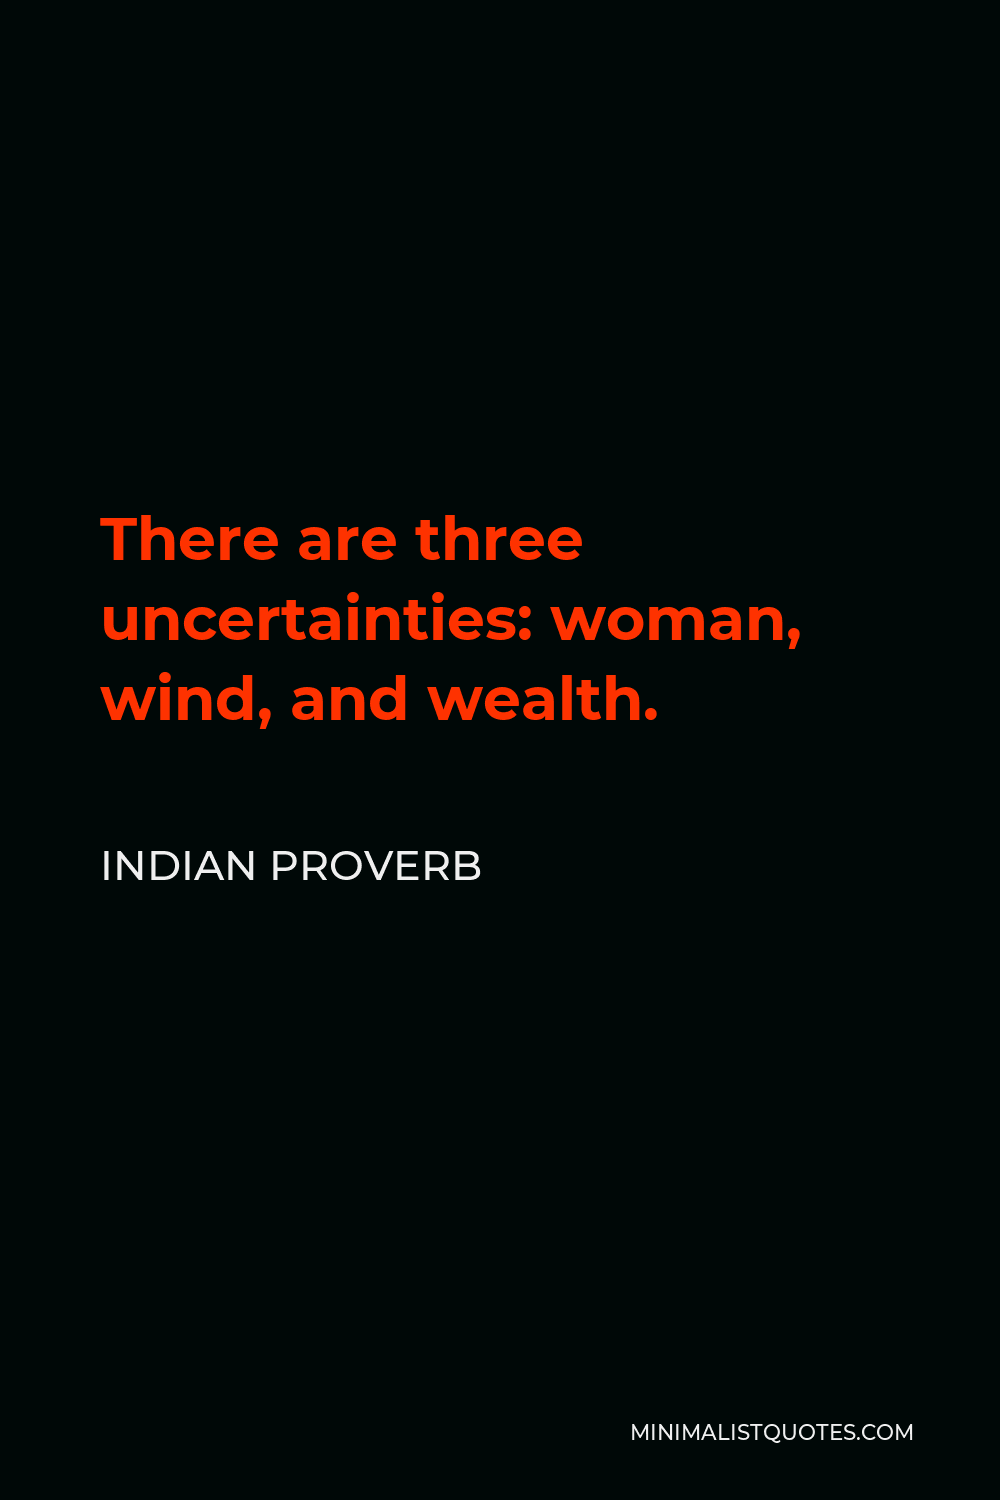 Indian Proverb Quote - There are three uncertainties: woman, wind, and wealth.